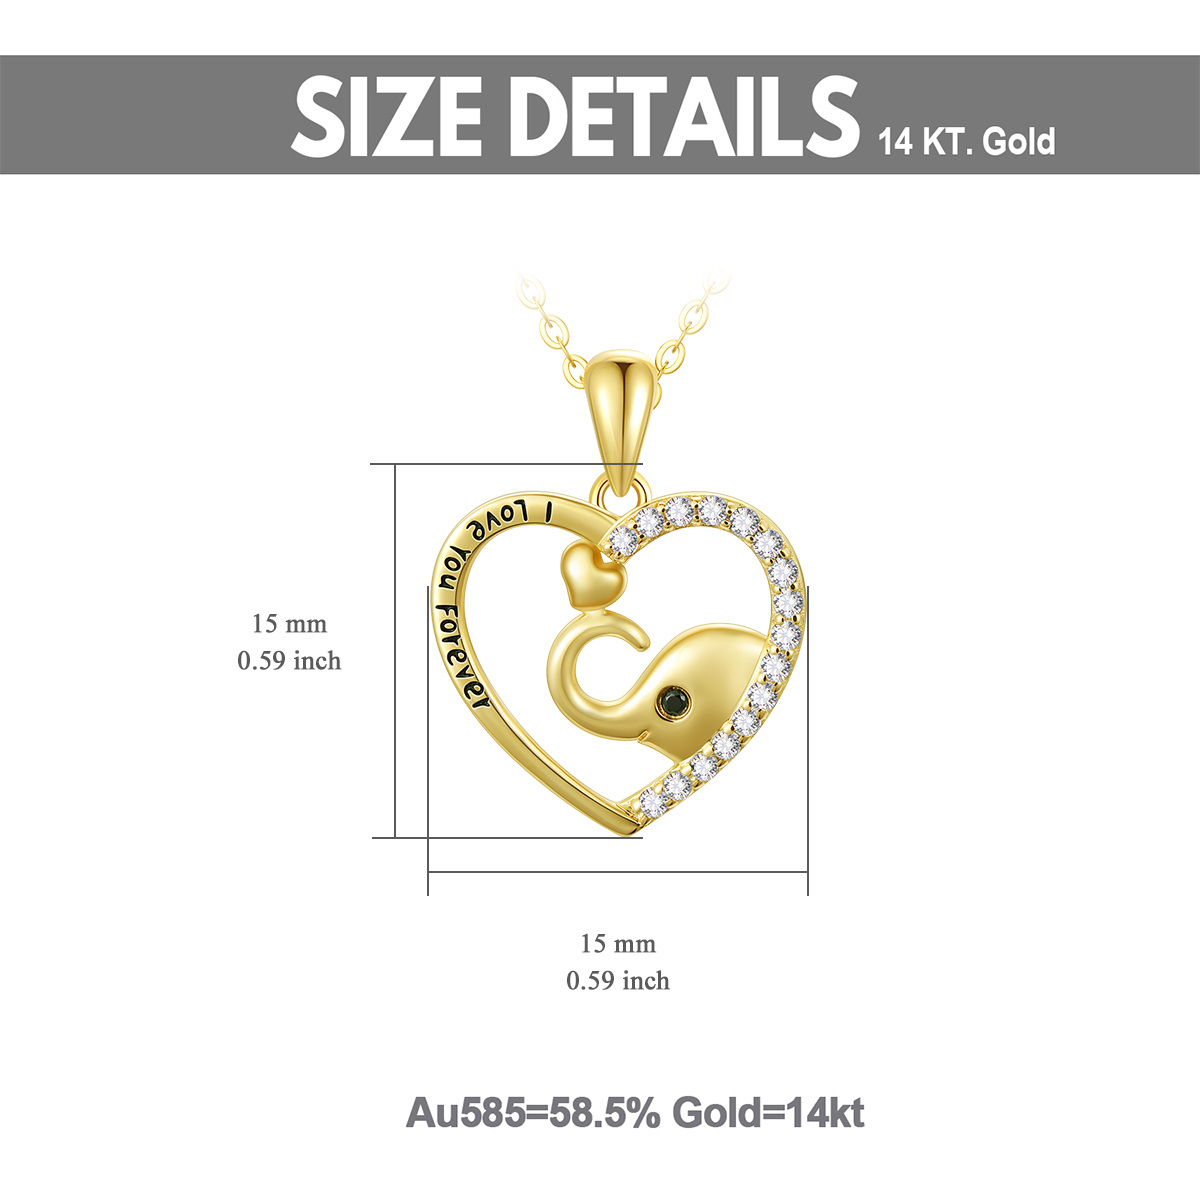 14K Gold Cubic Zirconia Elephant & Heart Pendant Necklace with Engraved Word-6